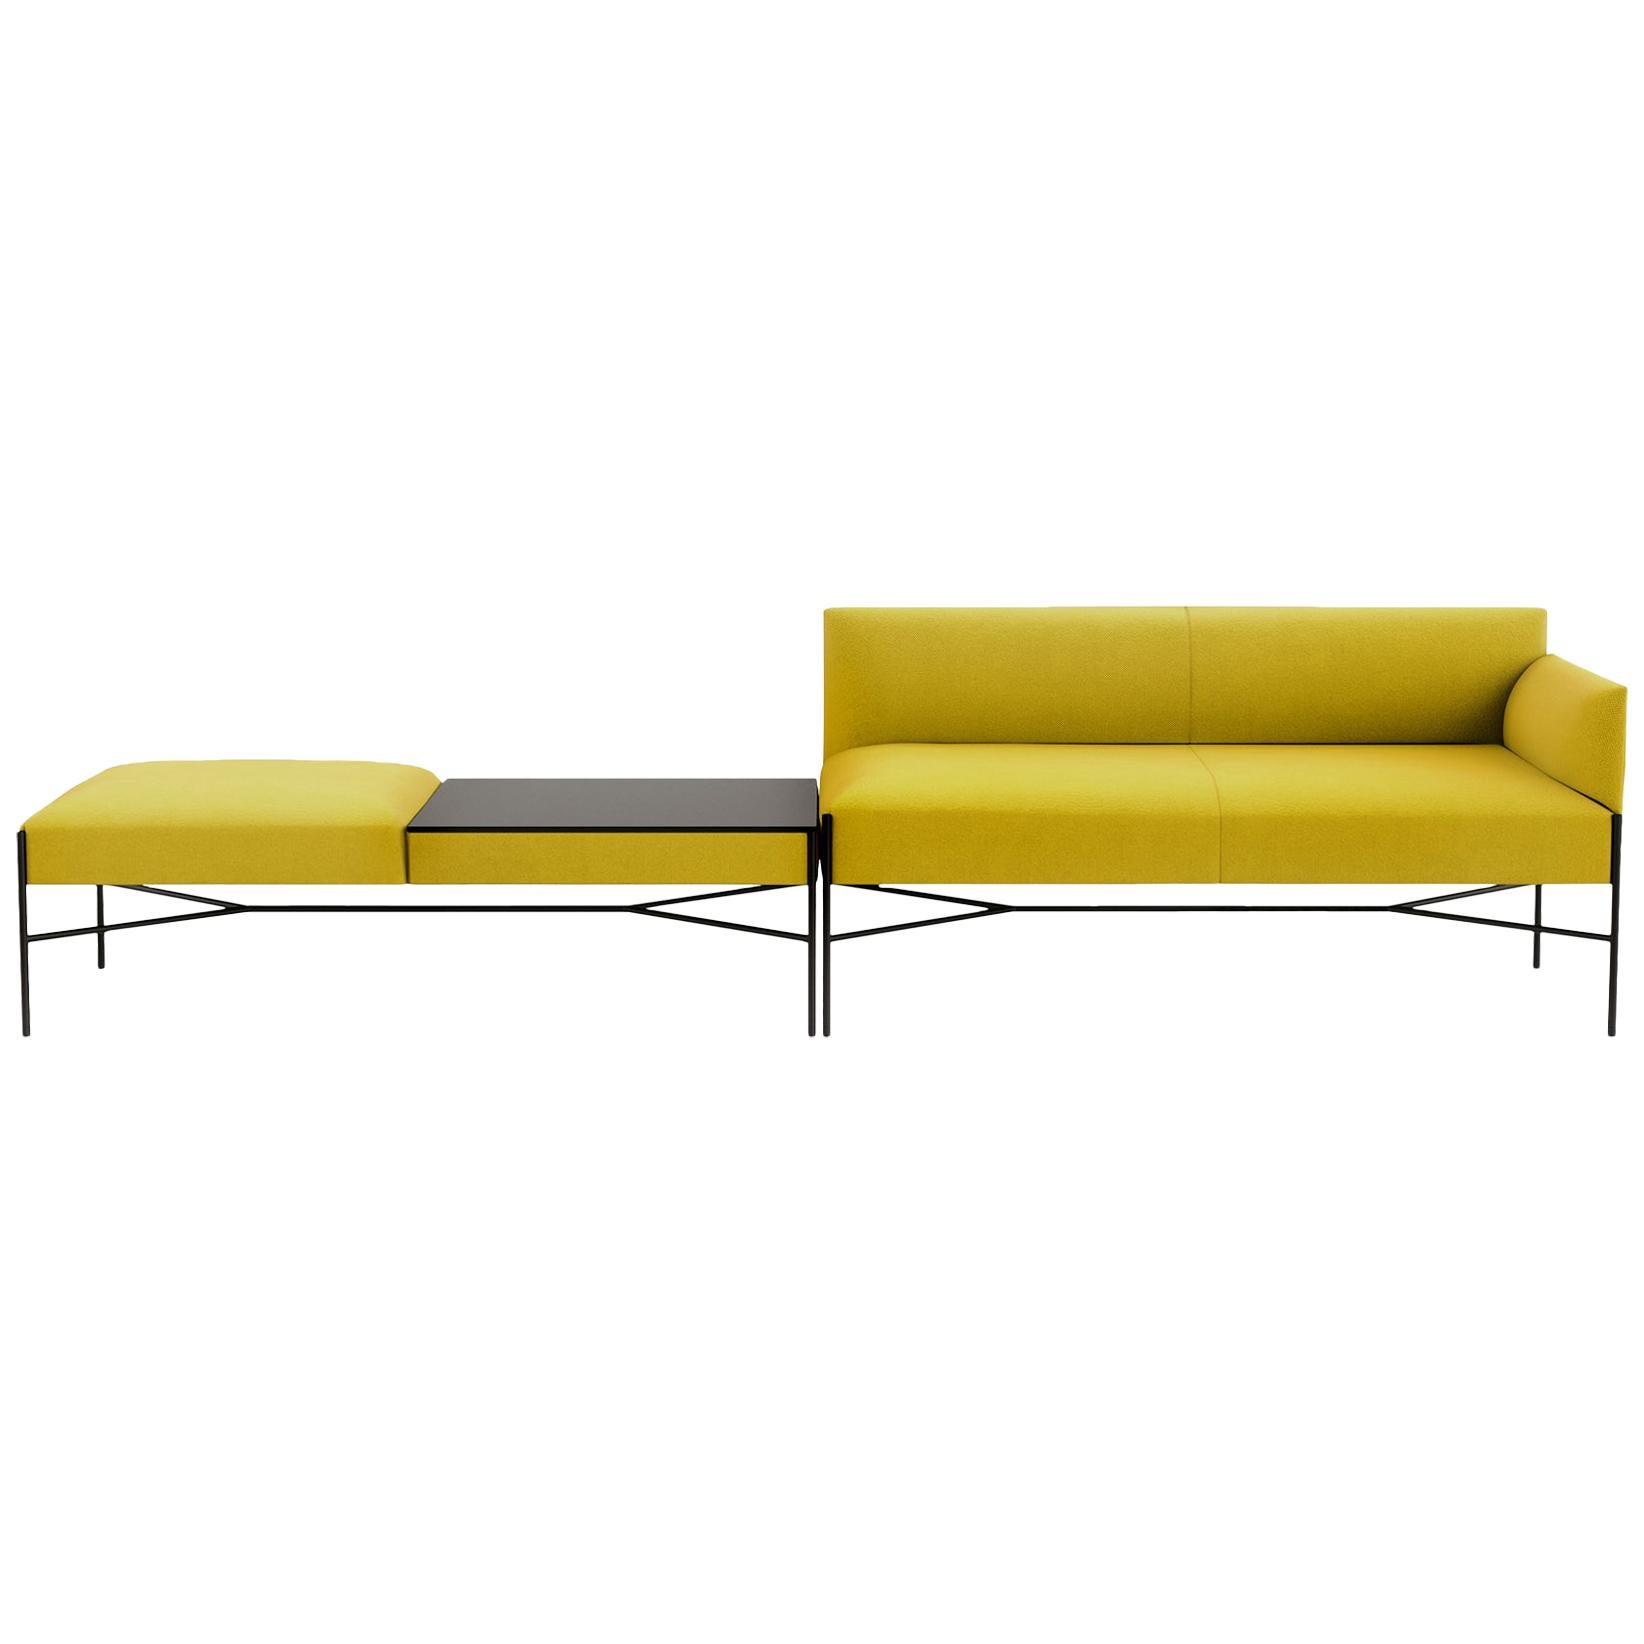 Tacchini Chill-Out Modular Sofa in Mustard Bryony Fabric by Gordon Guillaumier